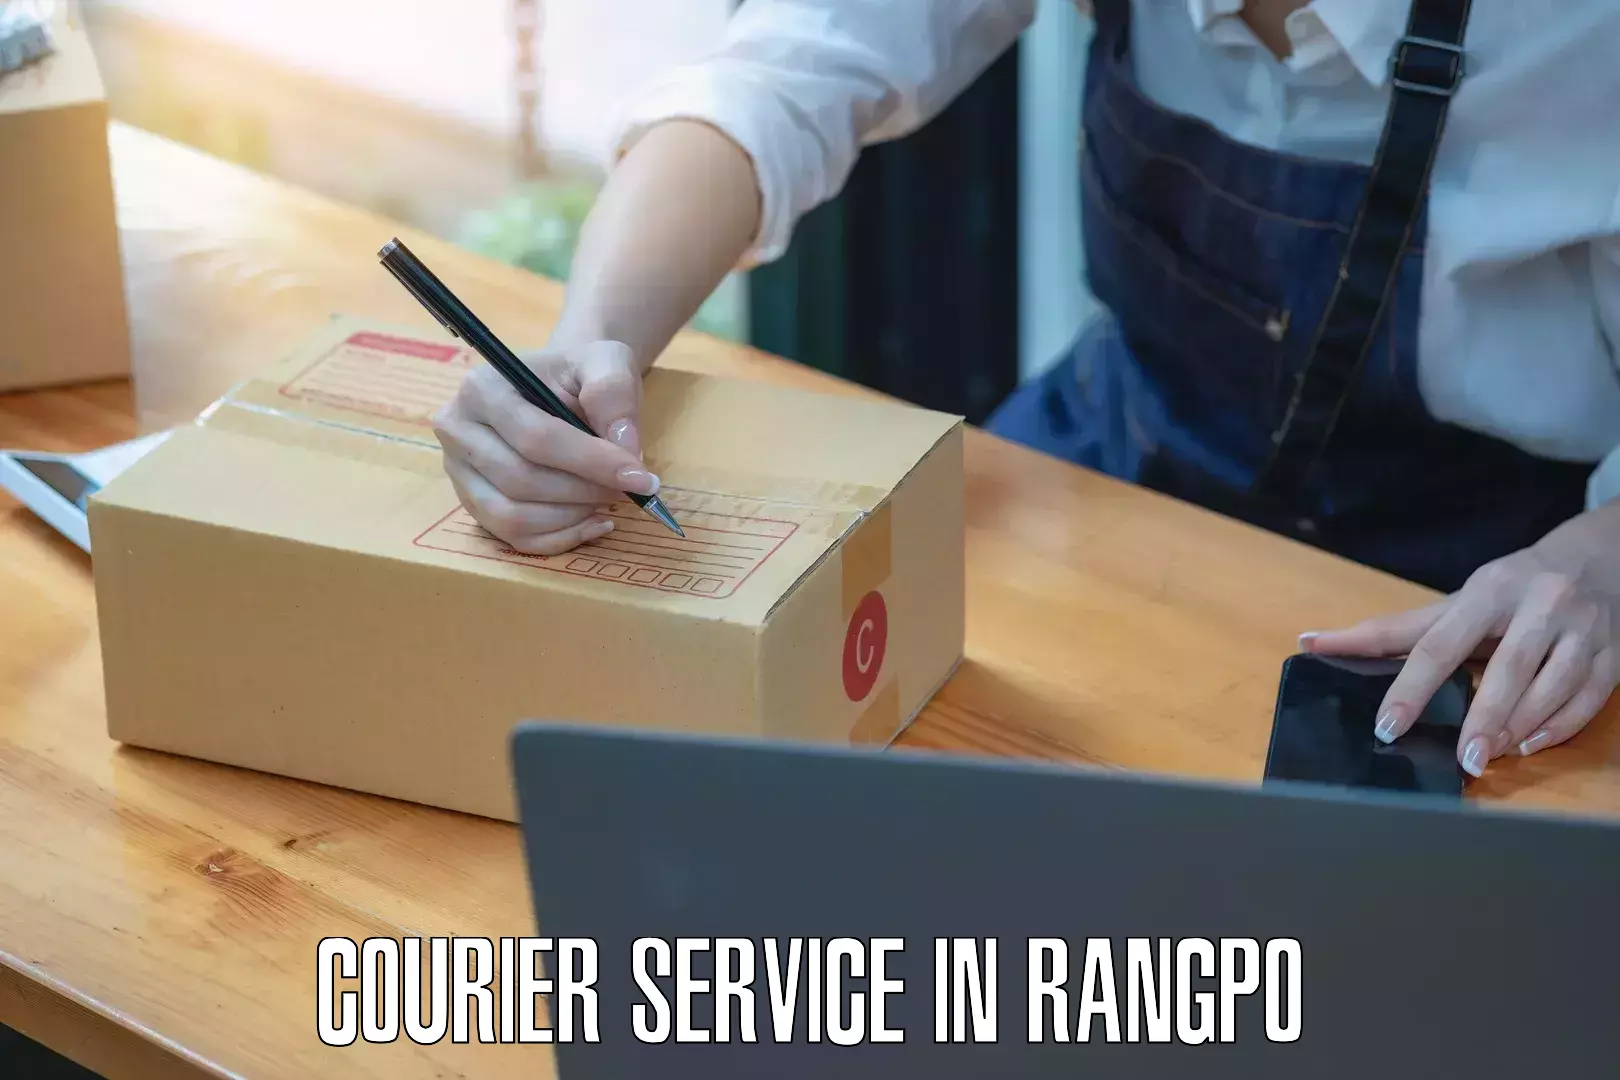 Courier service booking in Rangpo